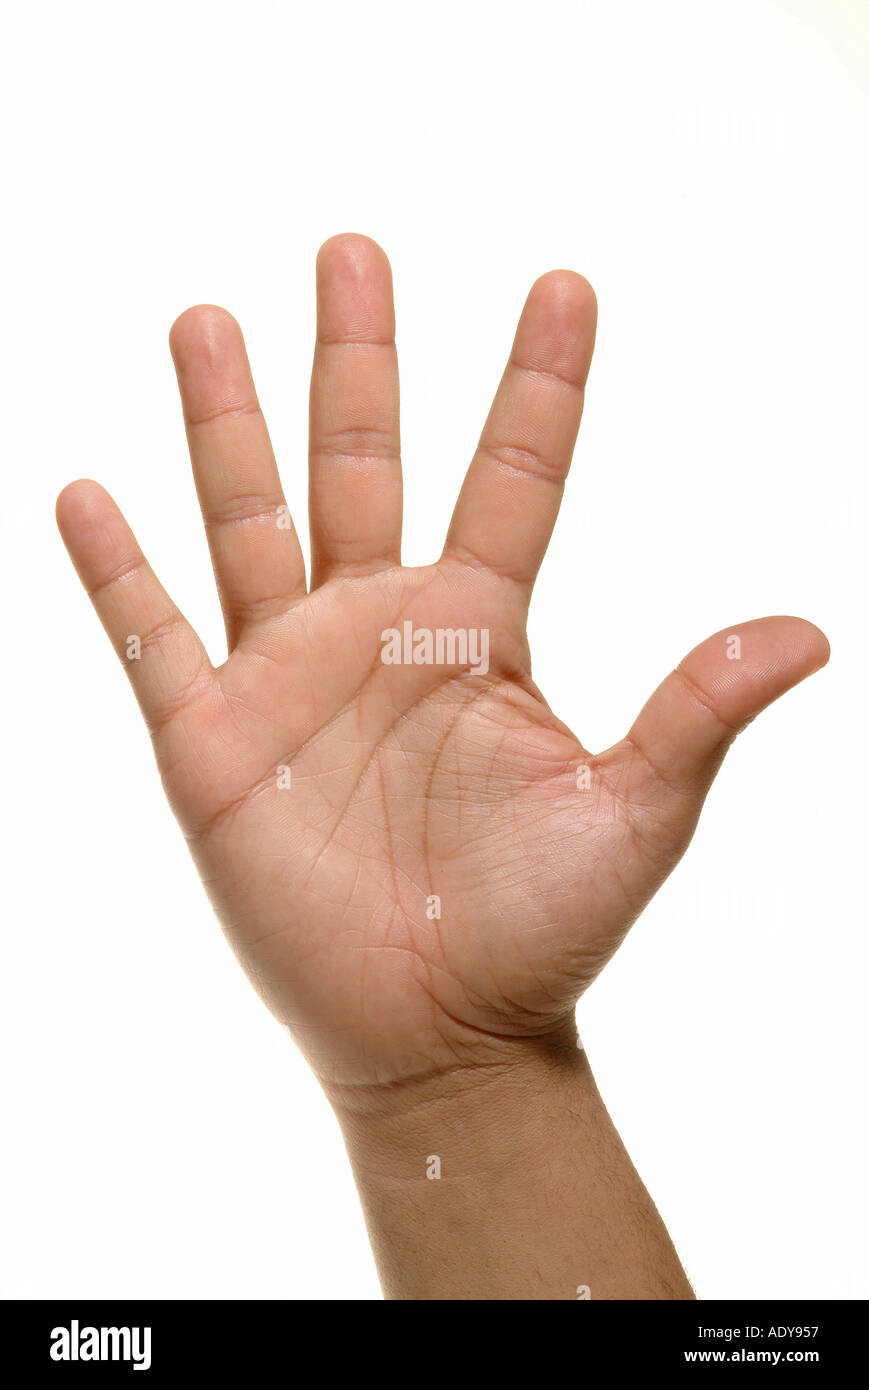 Five Fingers Stock Photos - 100,620 Images